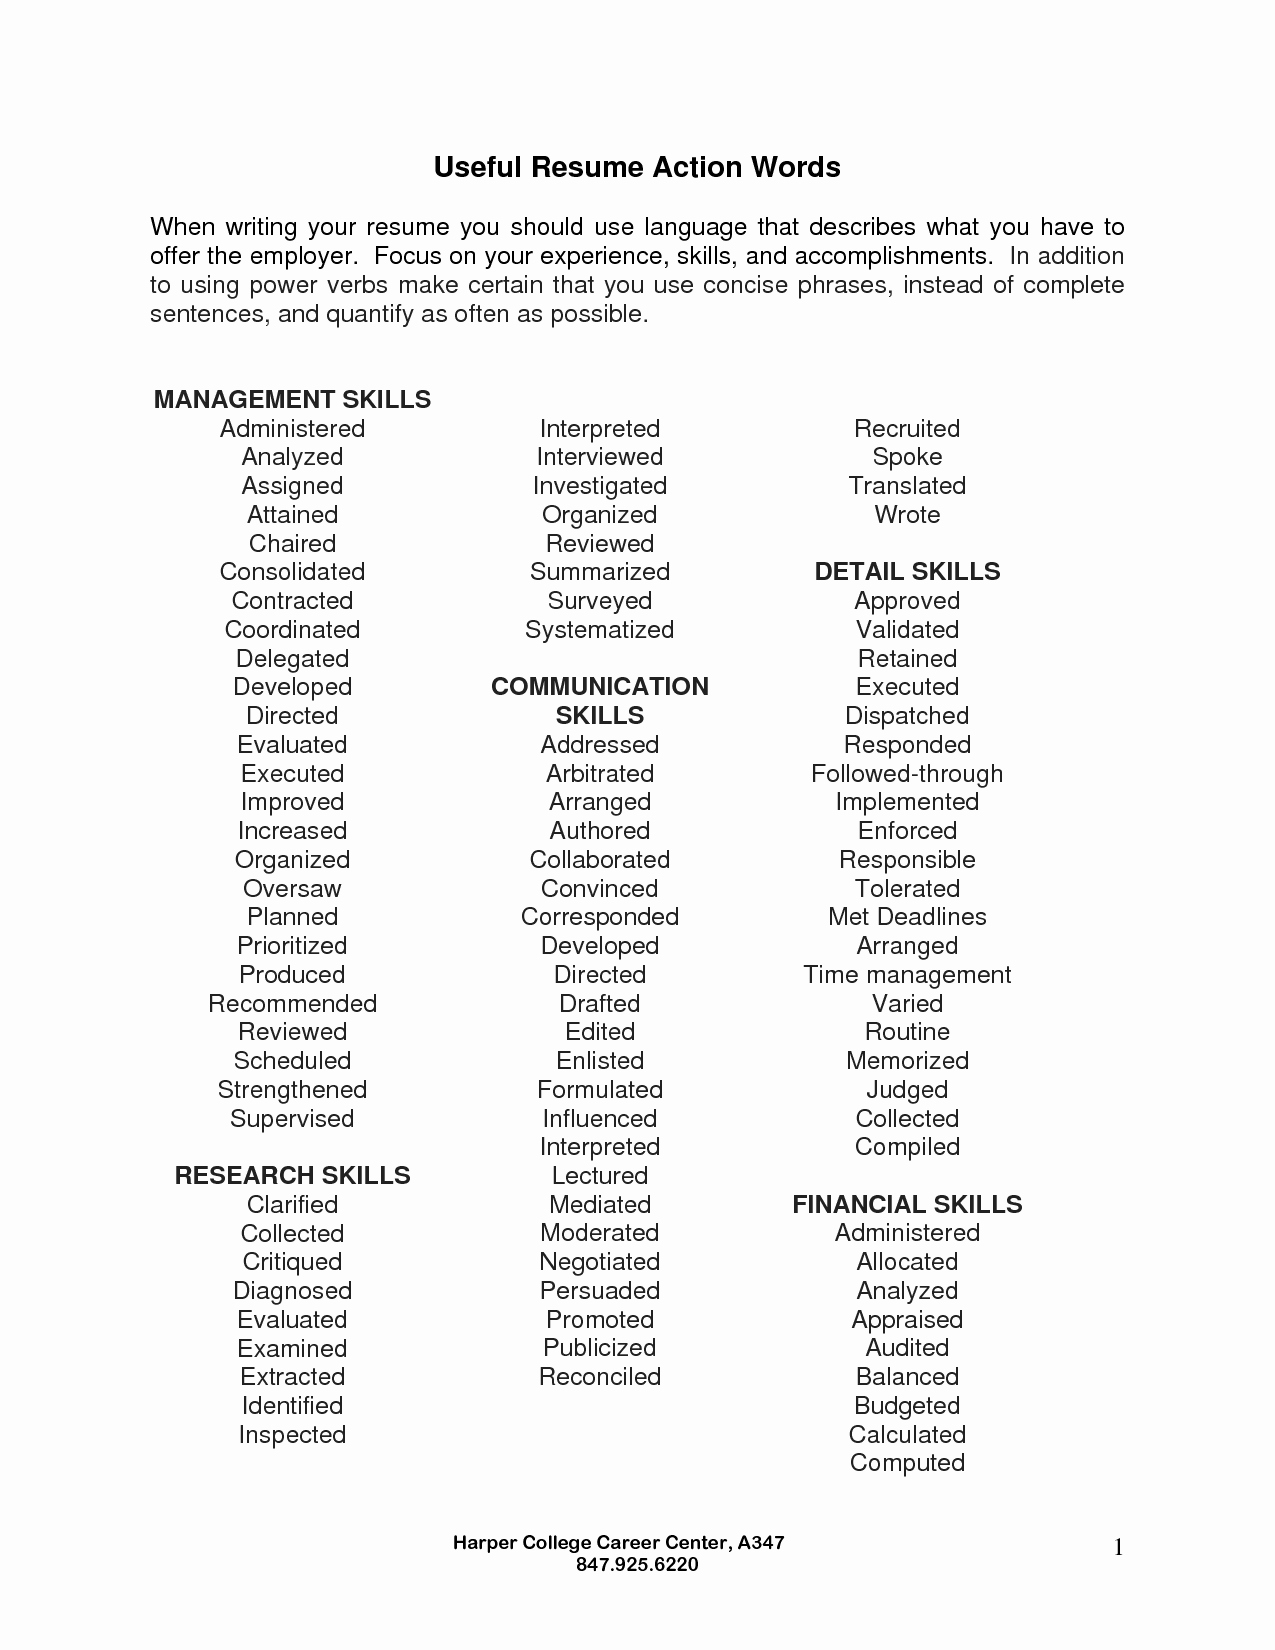 Resume Key Words and Phrases Fiveoutsiders